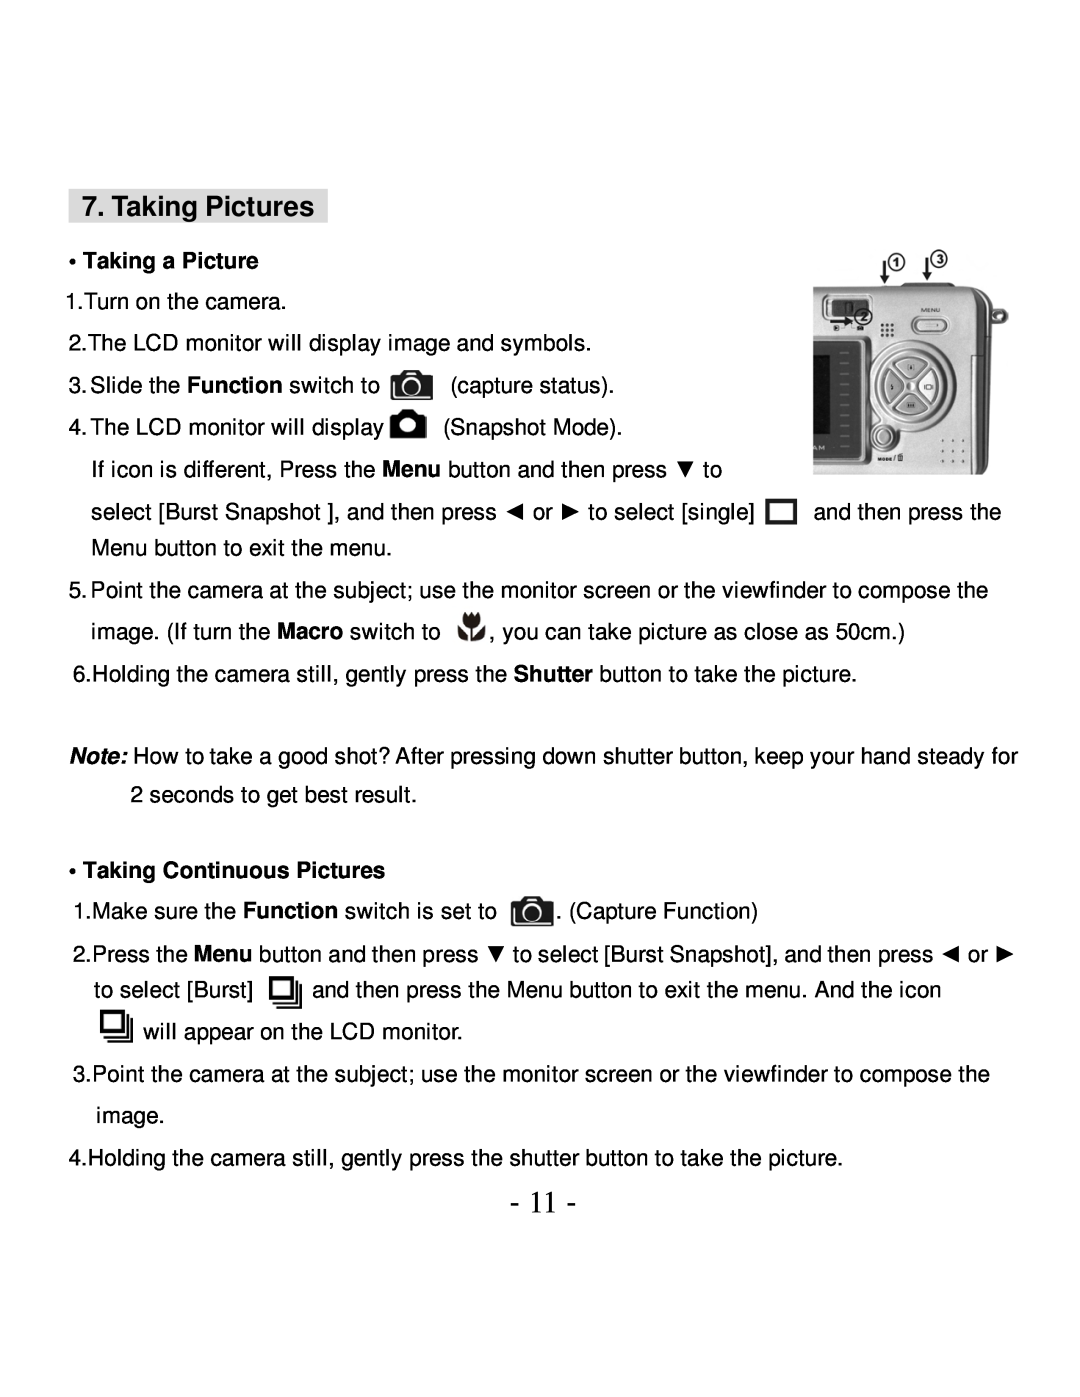 VistaQuest VQ5015 user manual Taking Pictures, Taking Continuous Pictures, Taking a Picture 1.Turn on the camera 